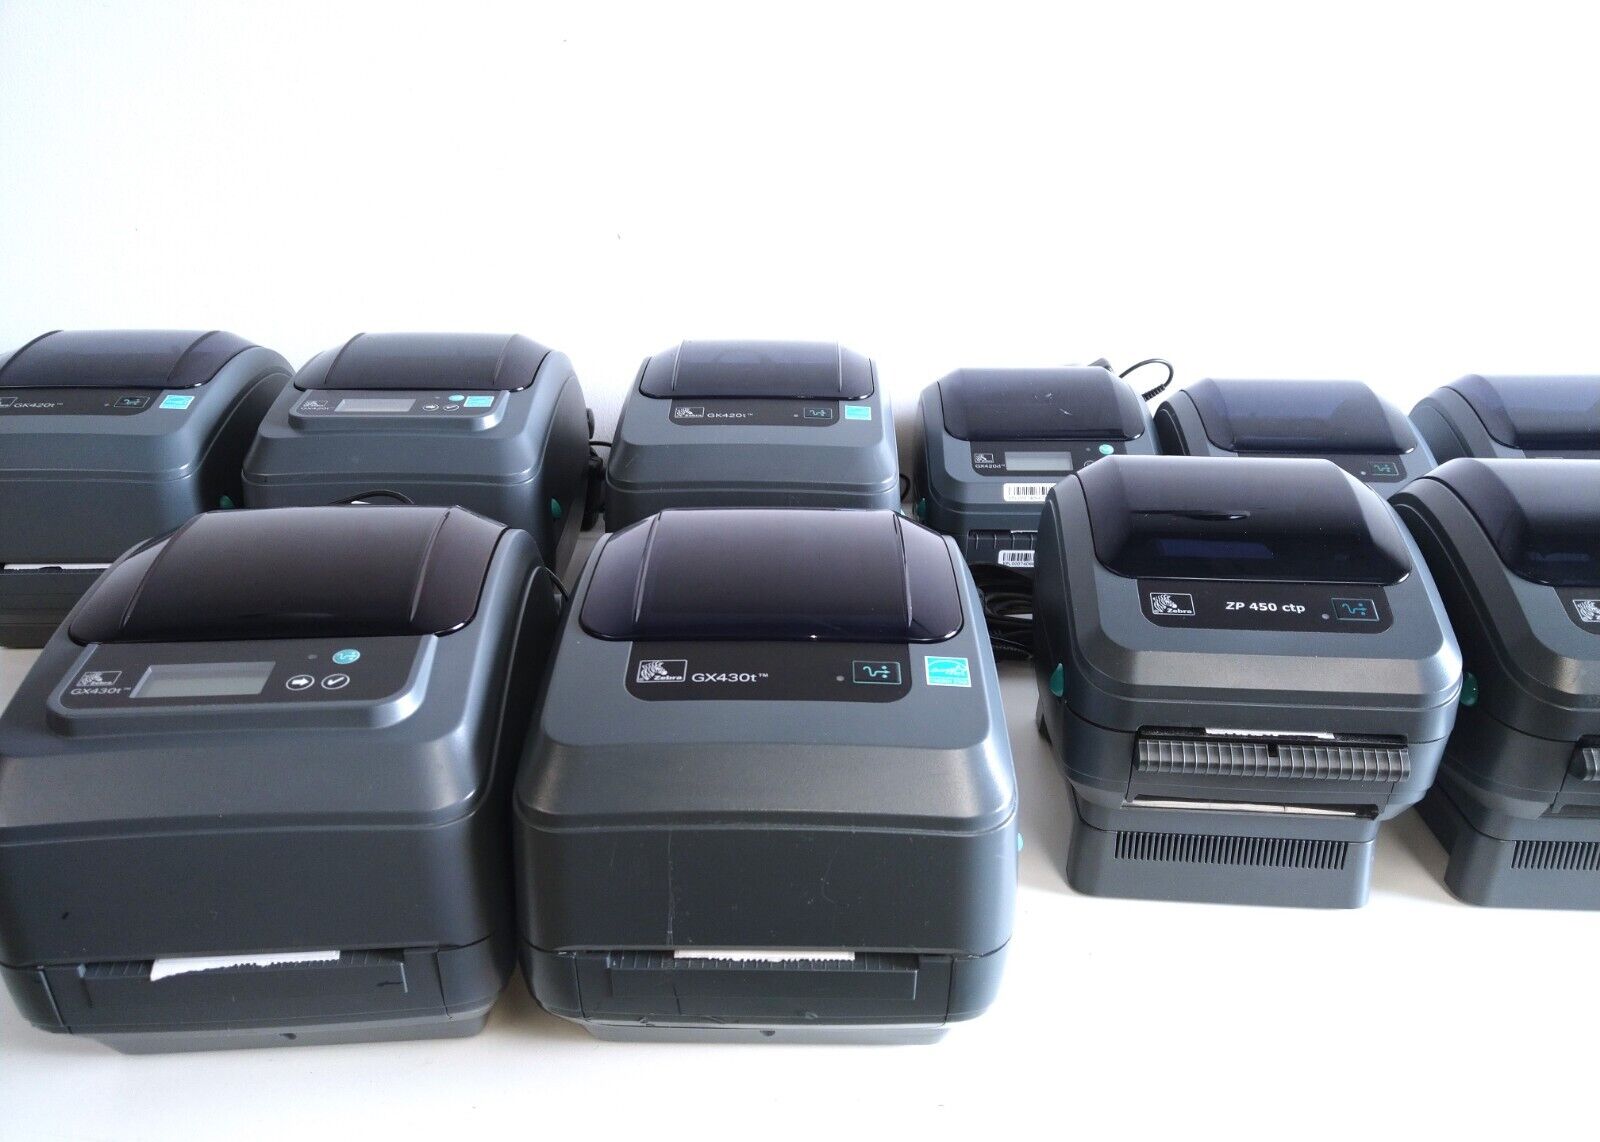 Professional Grade Zebra Product & Shipping Label/Barcode Printers [LOT OF 10]